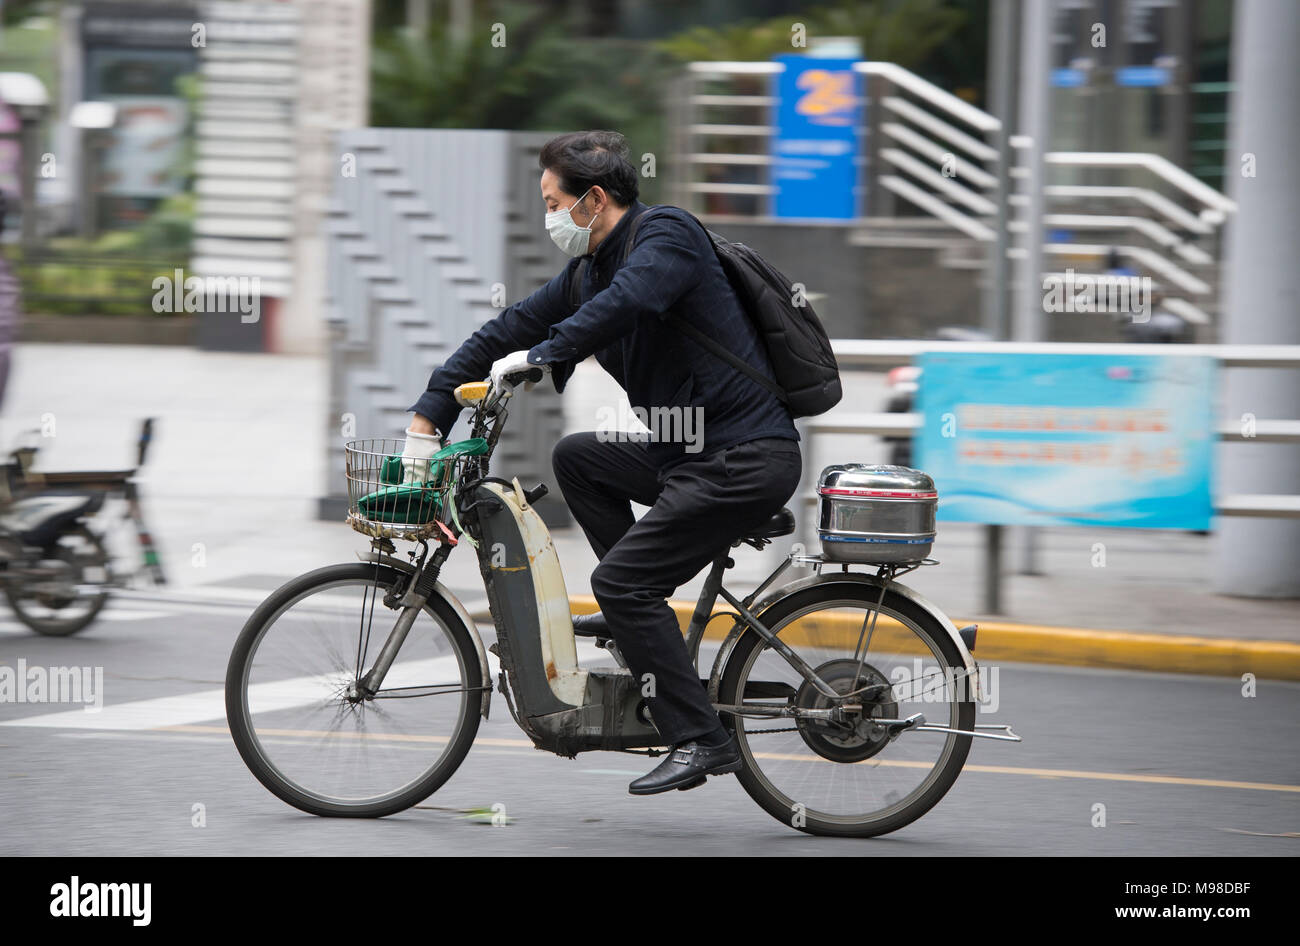 Man wearing a face mask riding a scooter in Shanghai, China Stock Photo